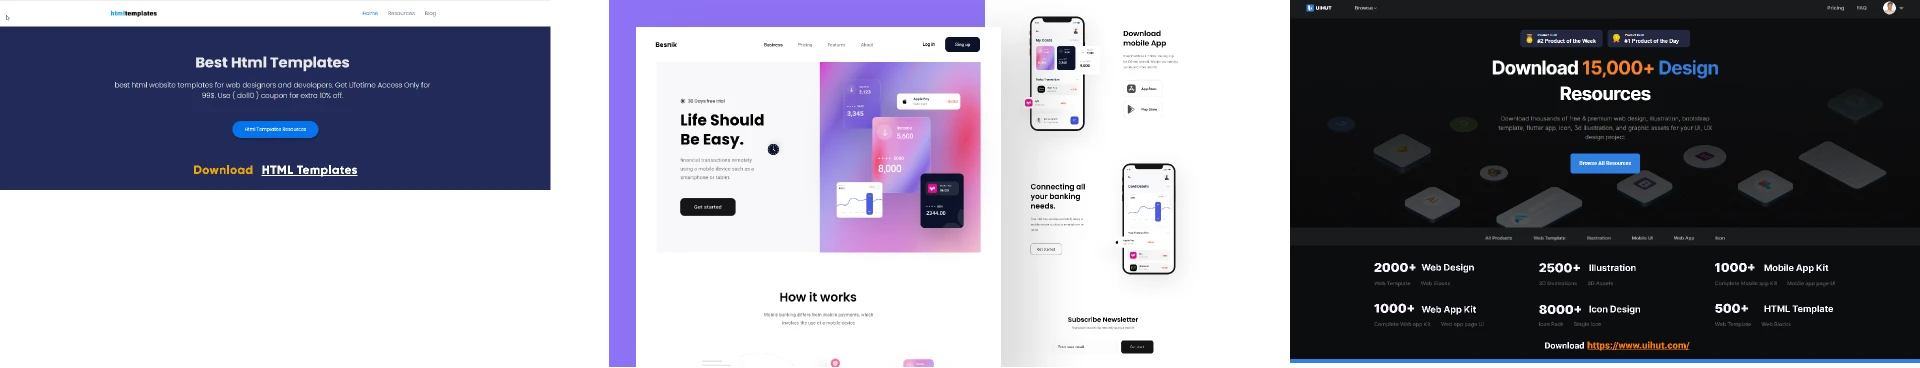 Mobile Banking website Landing Page for Figma and Adobe XD